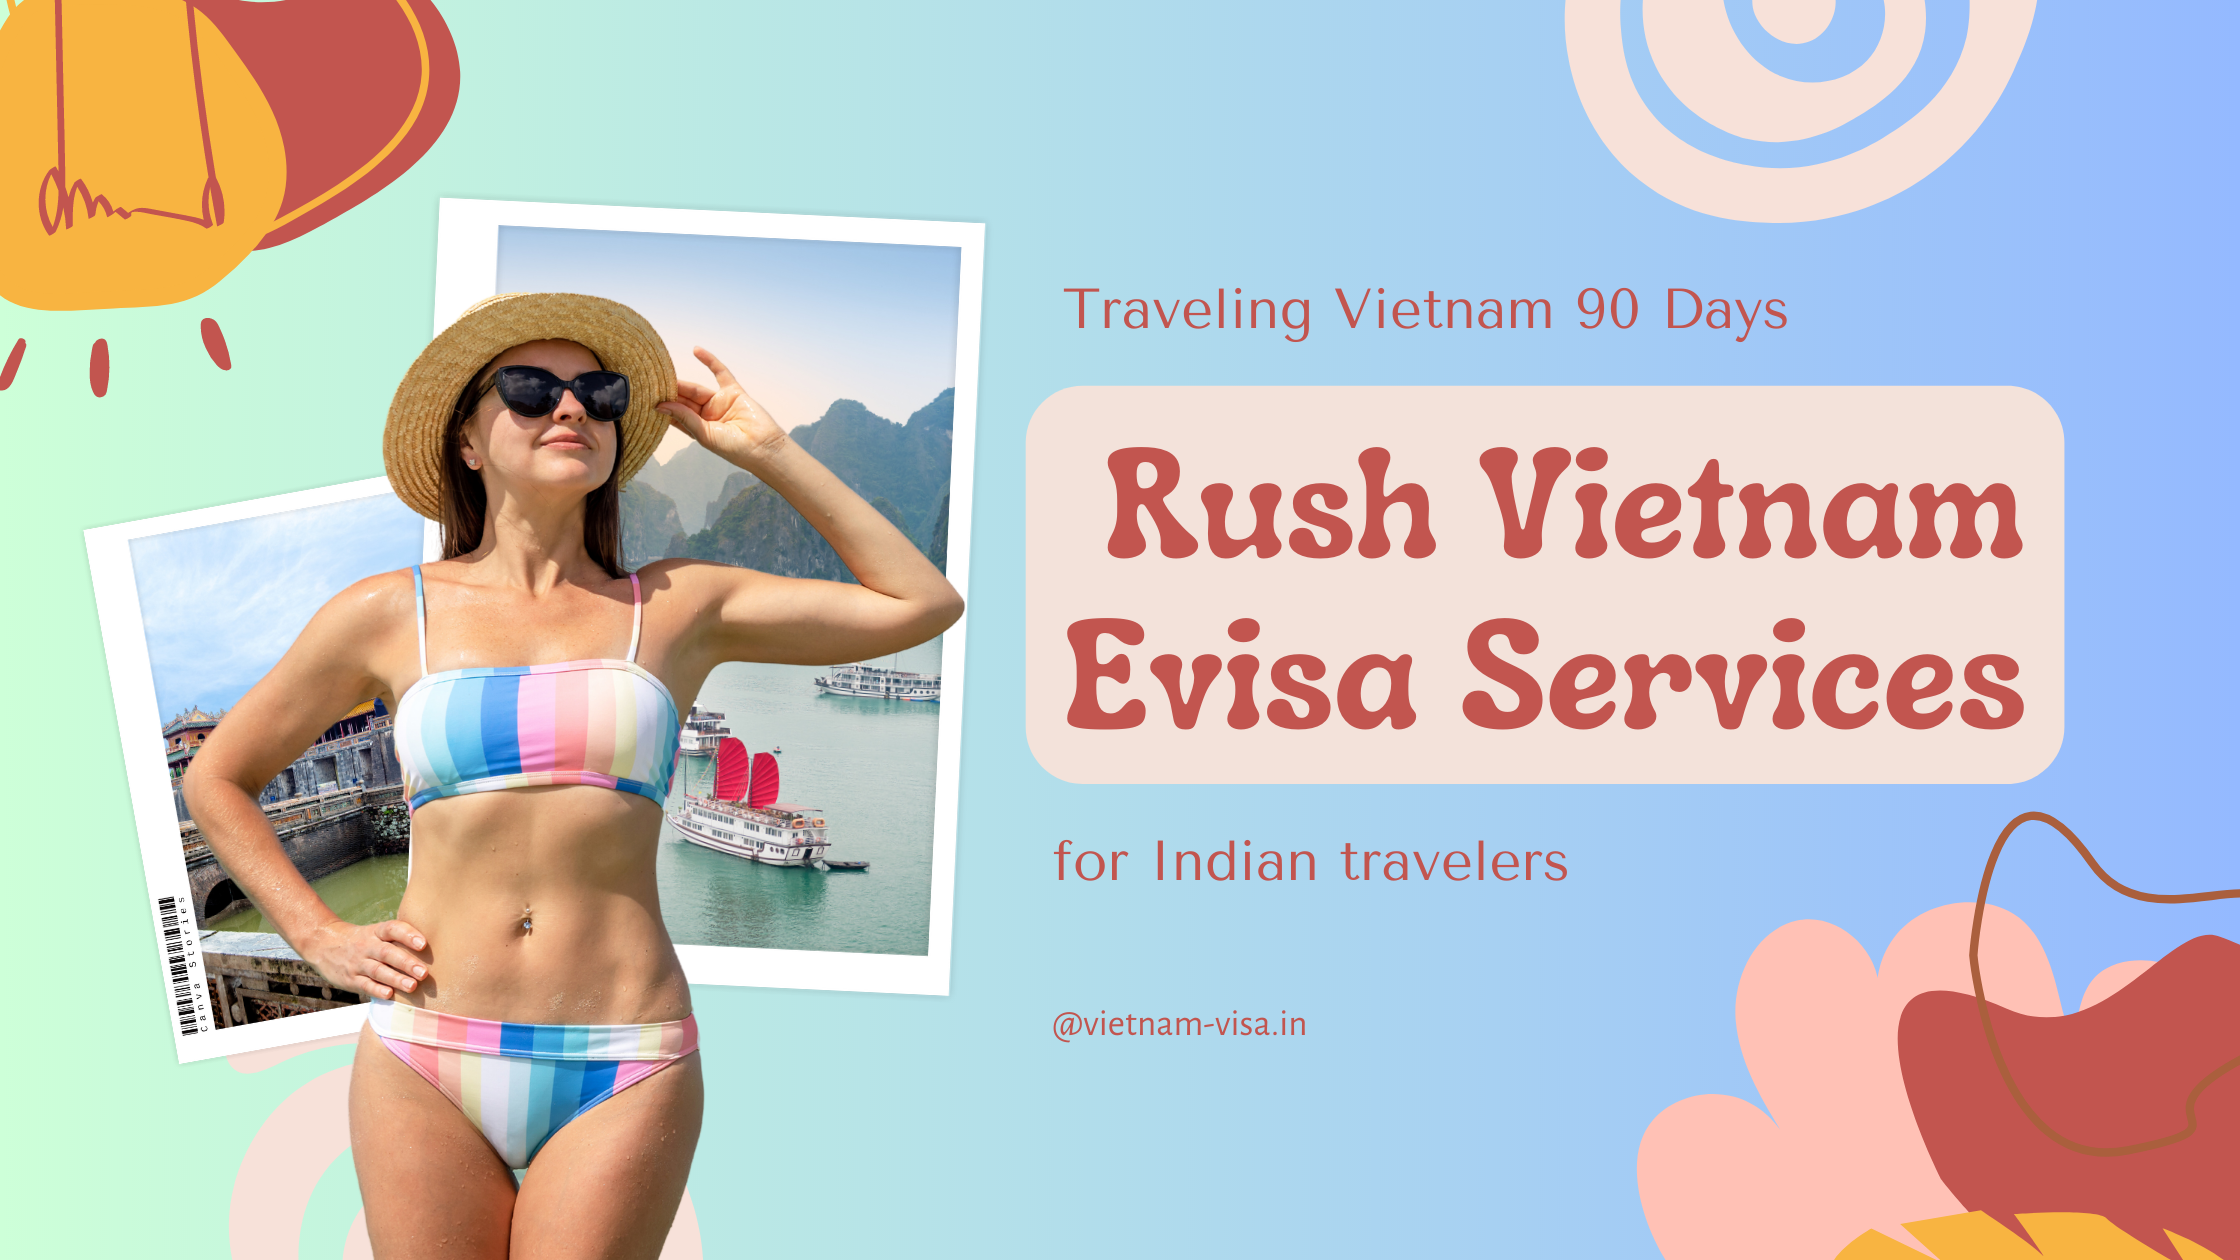 Traveling-to-Vietnam for-90-Days-with-Rush-Evisa-Services-for-Indian-travelers-(2023-2024)